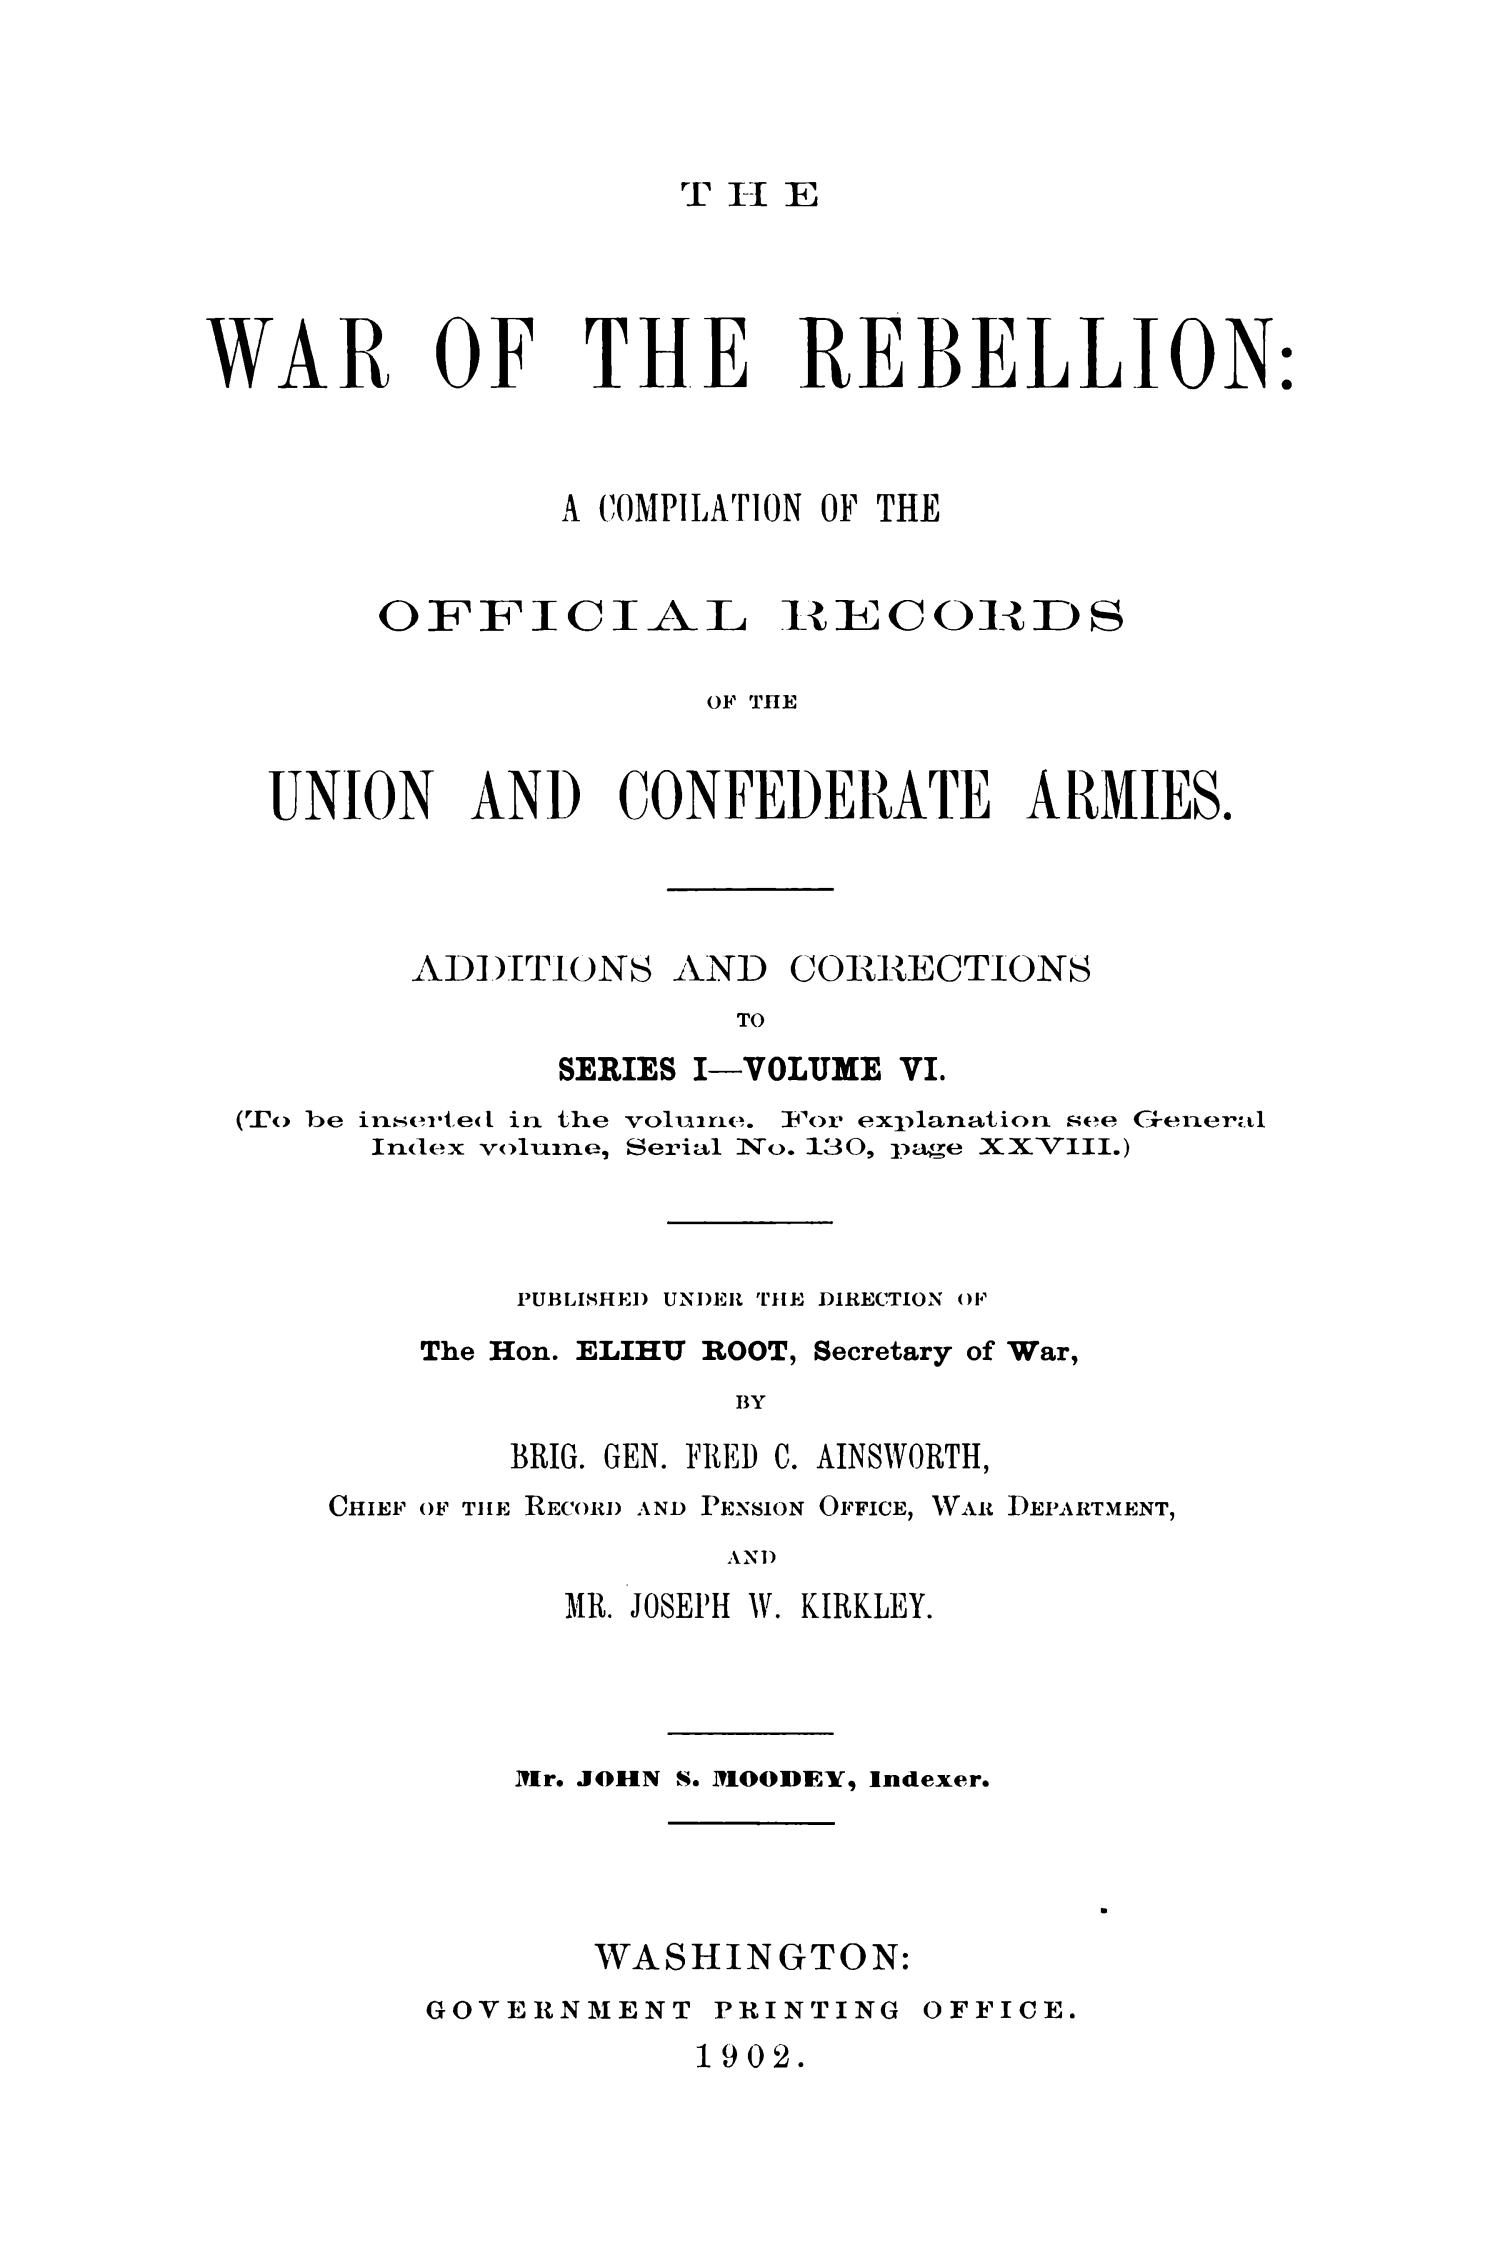 The War of the Rebellion: A Compilation of the Official Records of the Union And Confederate Armies. Additions and Corrections to Series 1, Volume 6.
                                                
                                                    1
                                                